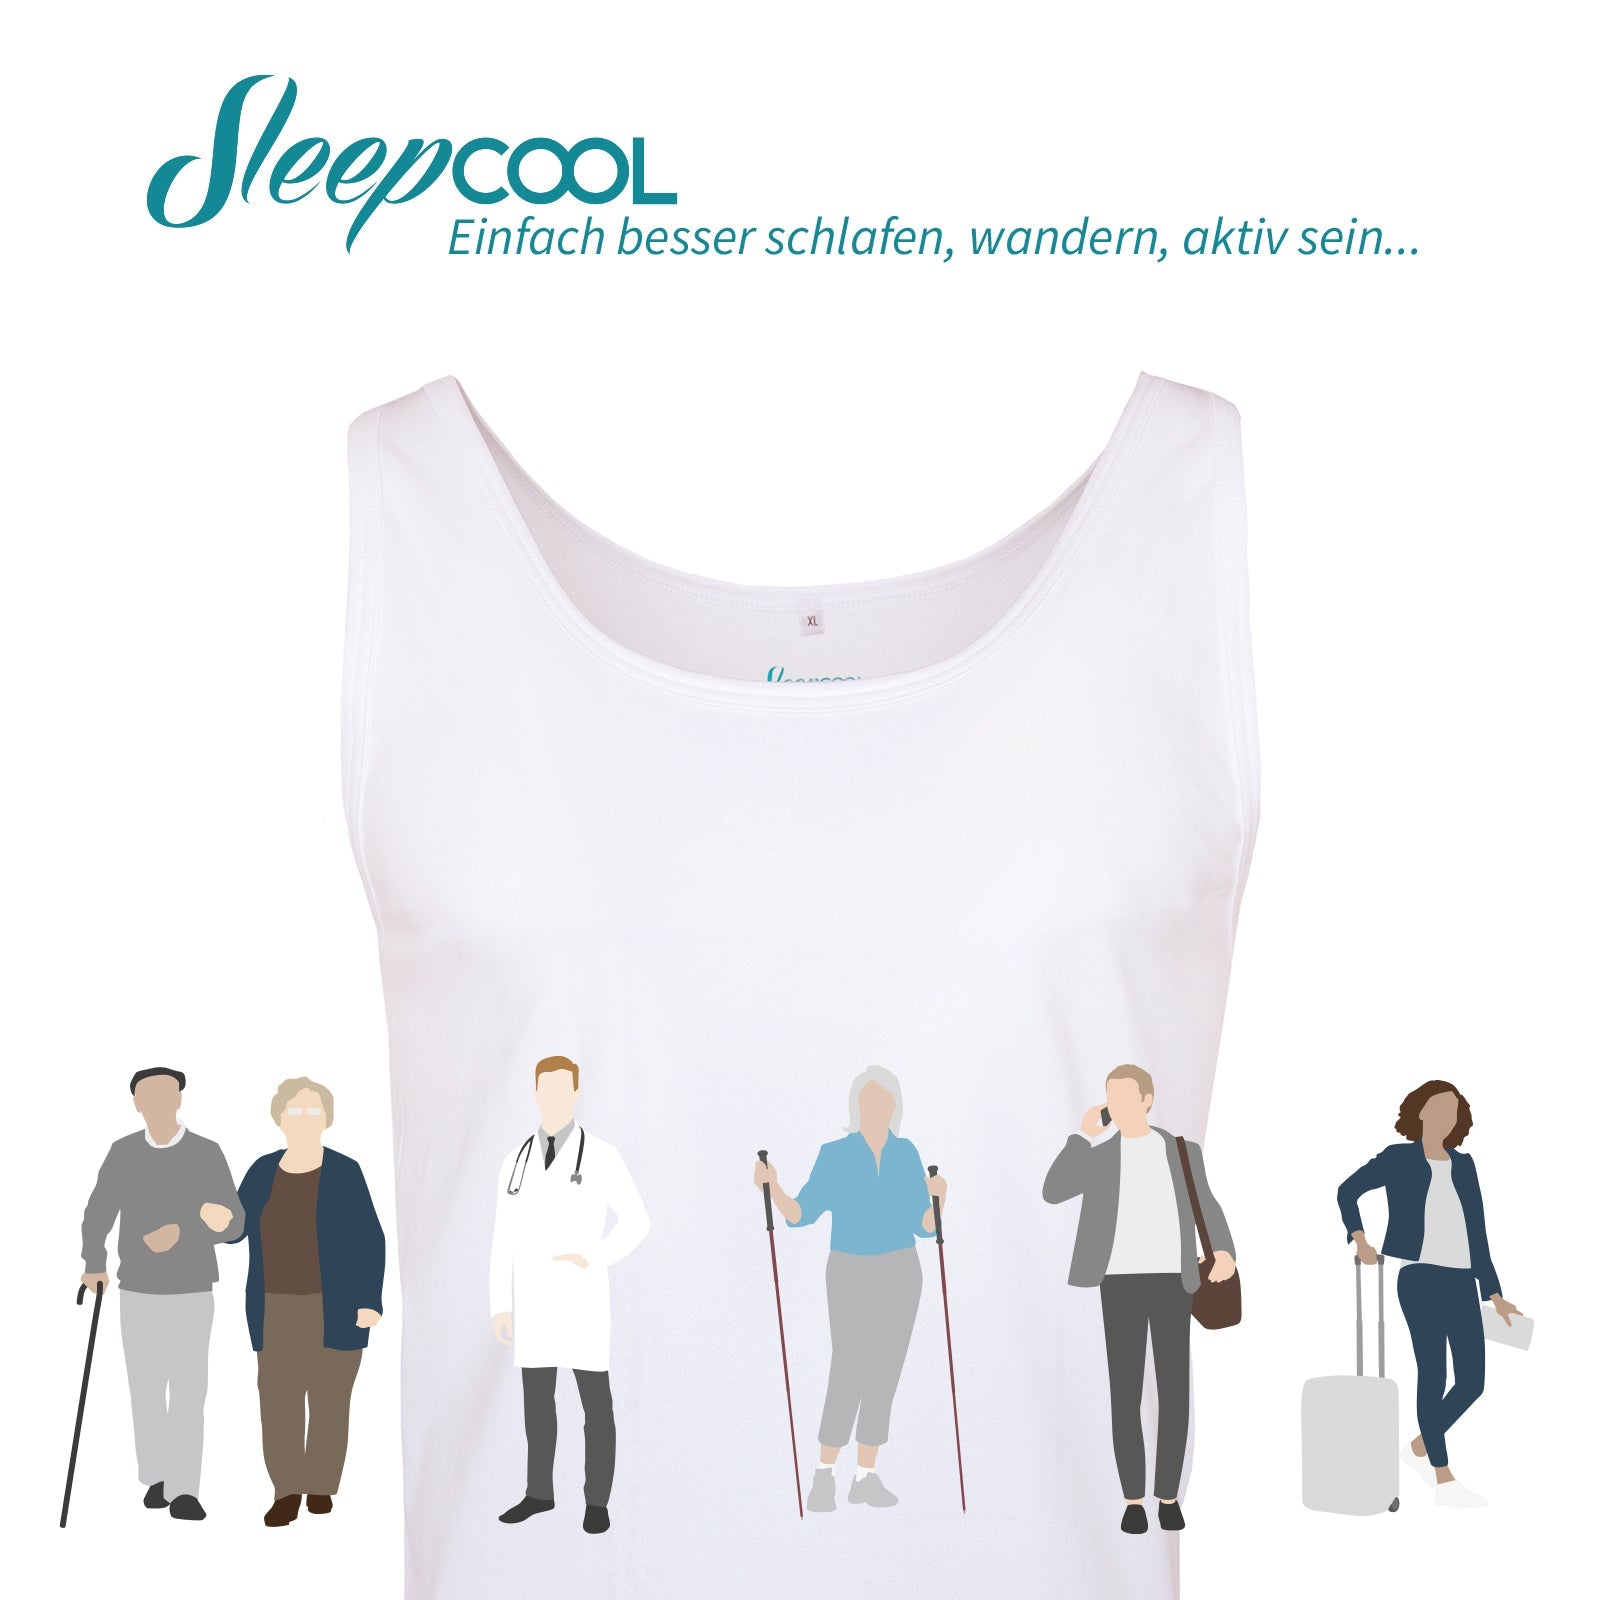 Functional T-shirt COOL.SKIN, ladies, pleasant freshness due to cooling effect, the SleepCOOL feeling to take away